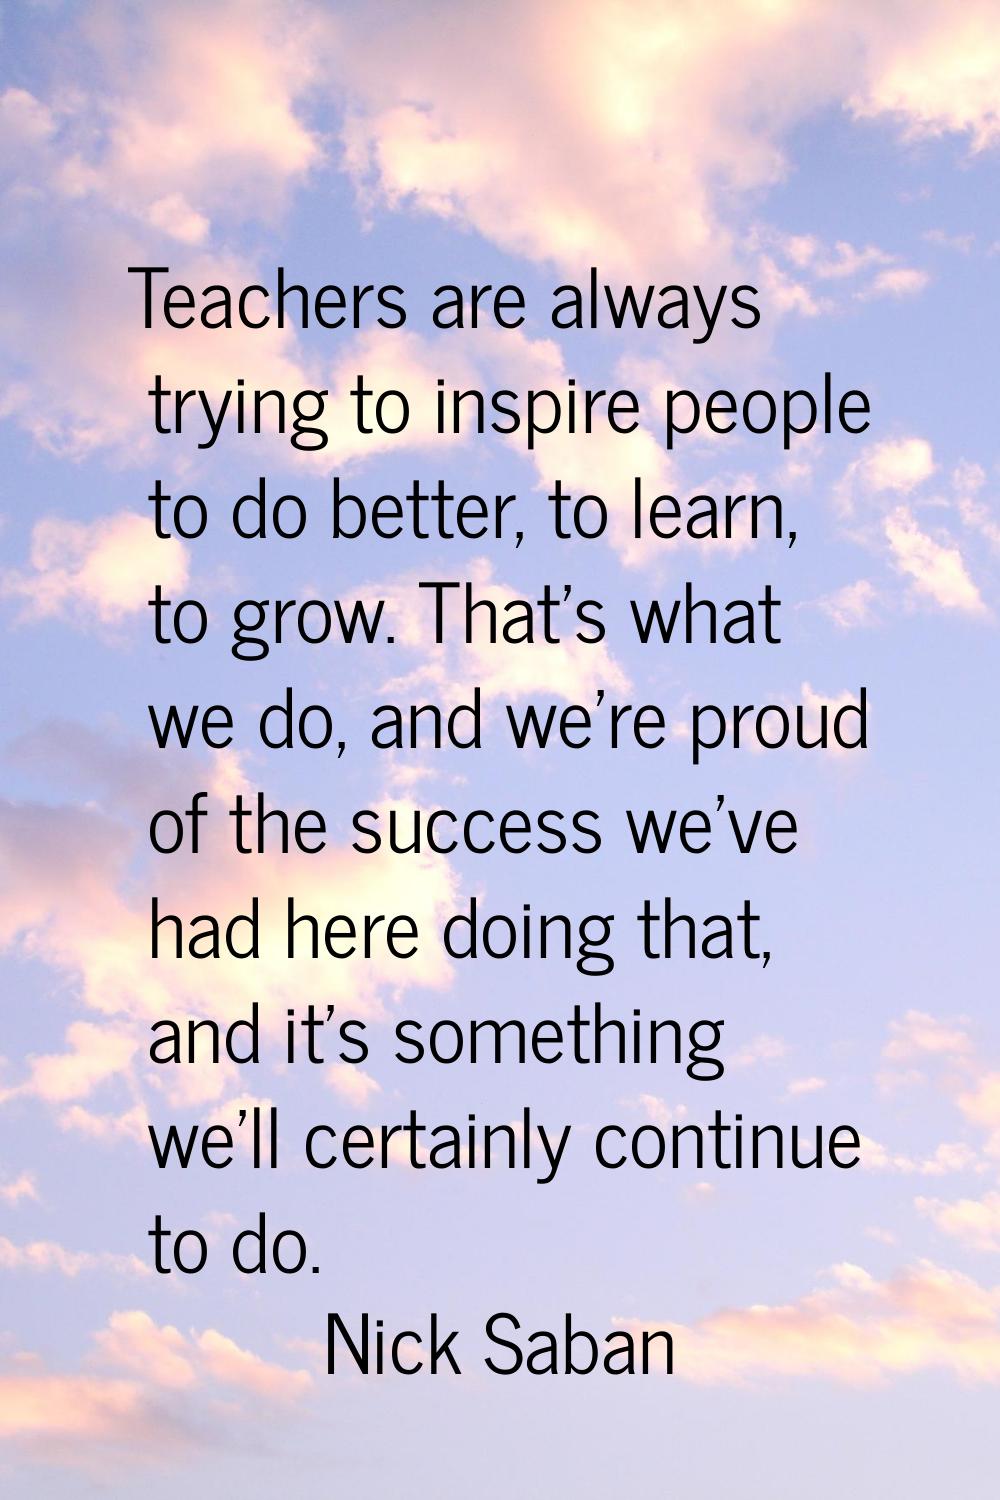 Teachers are always trying to inspire people to do better, to learn, to grow. That's what we do, an